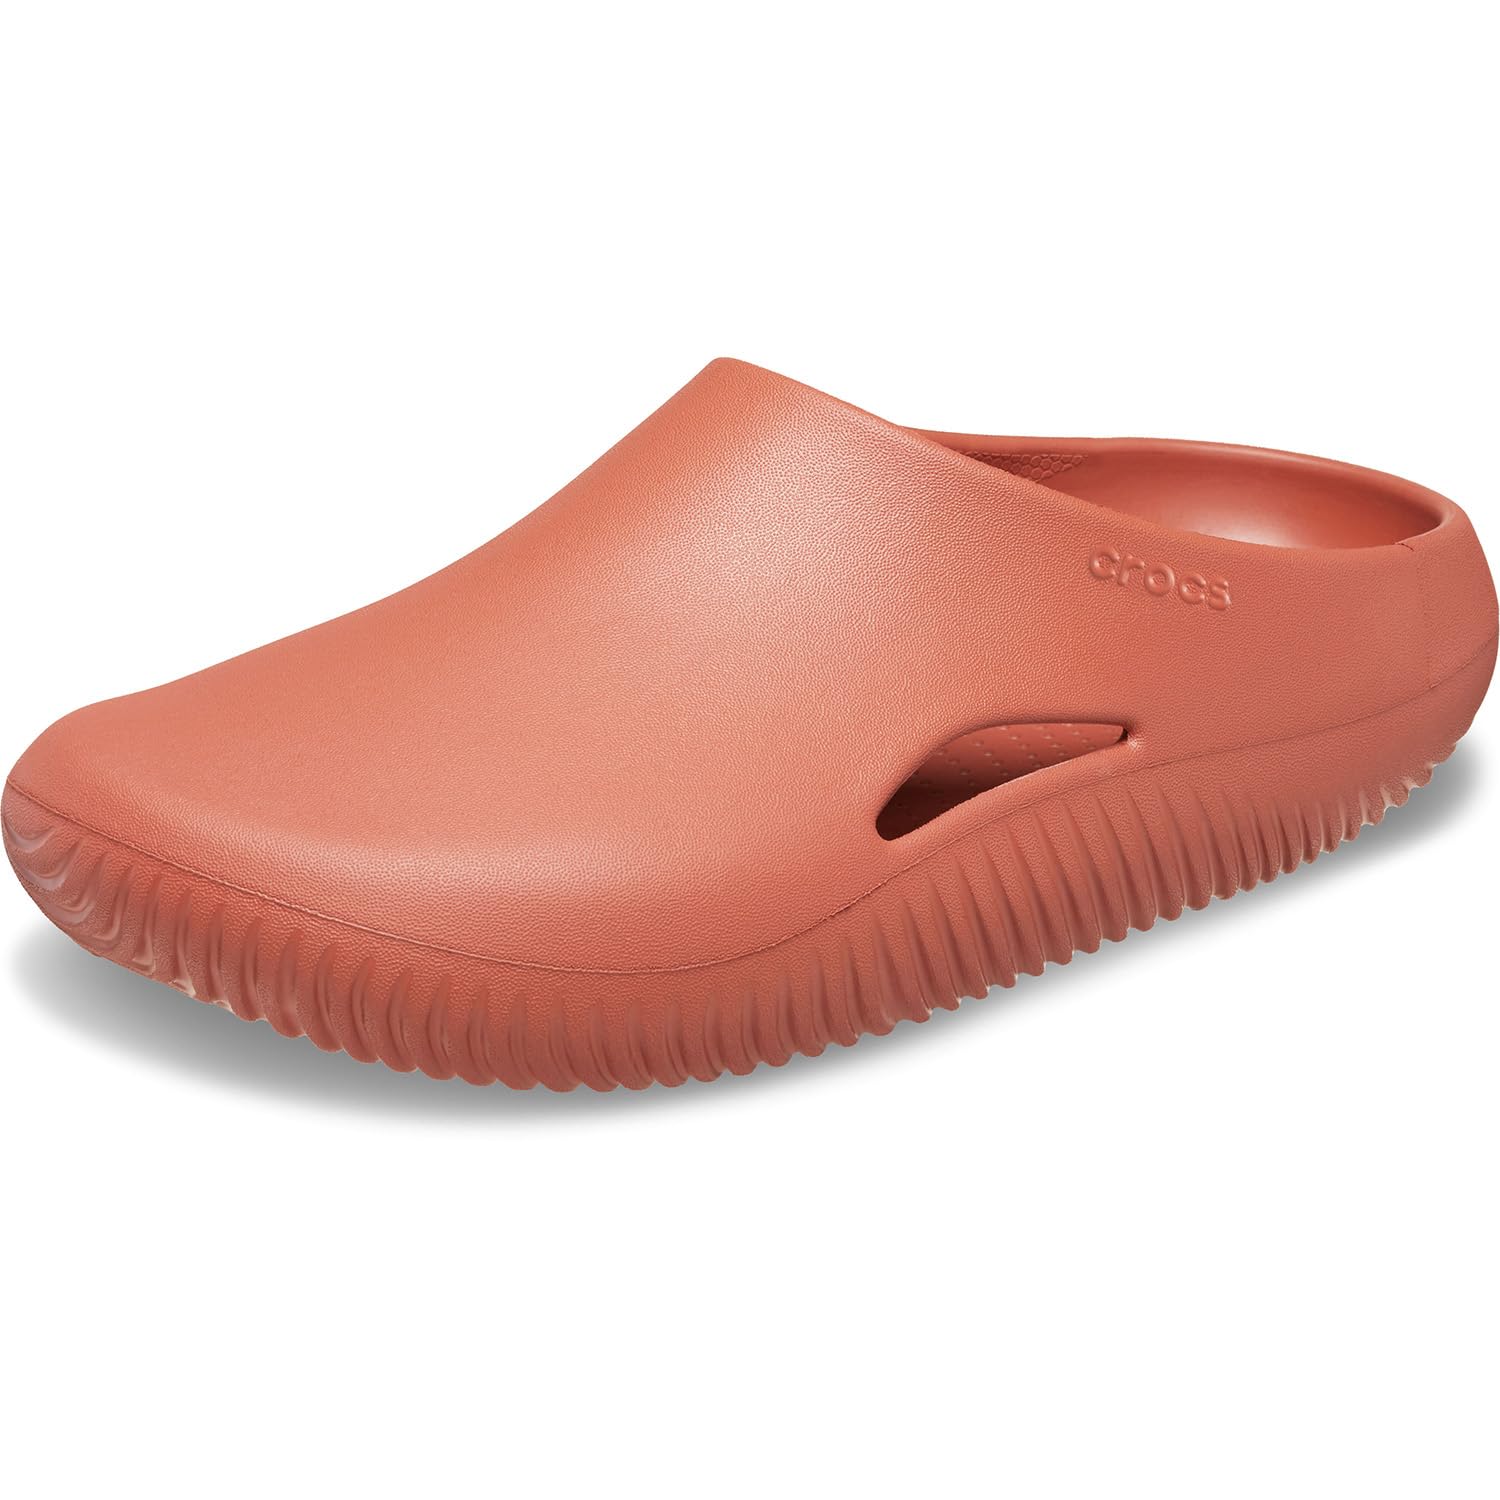 Crocs Unisex-Adult Mellow Recovery Clog